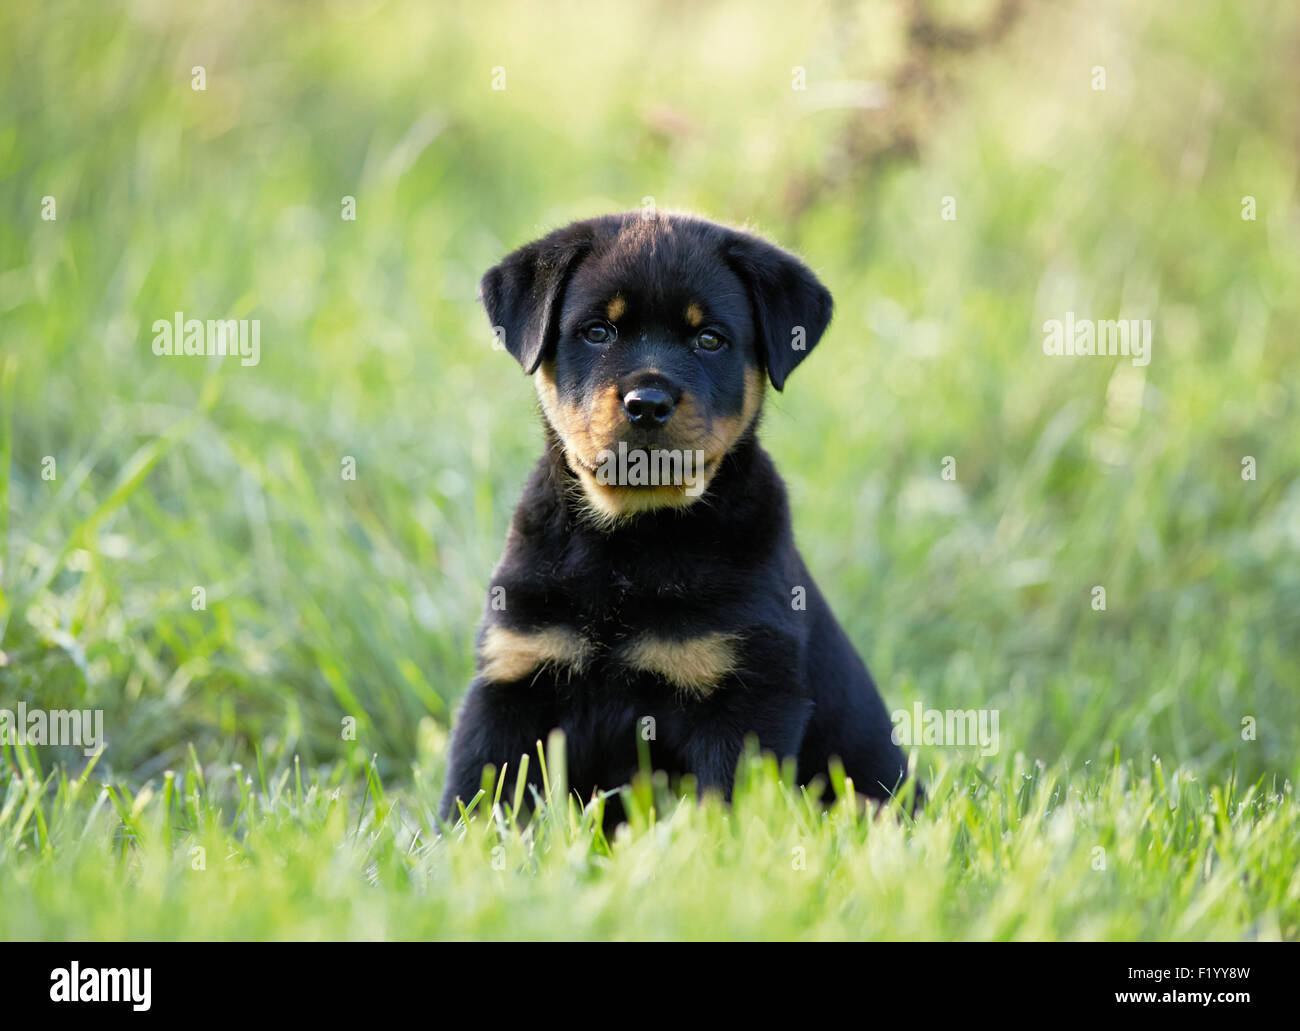 Rottweiler Puppy sitting lawn Allemagne Banque D'Images